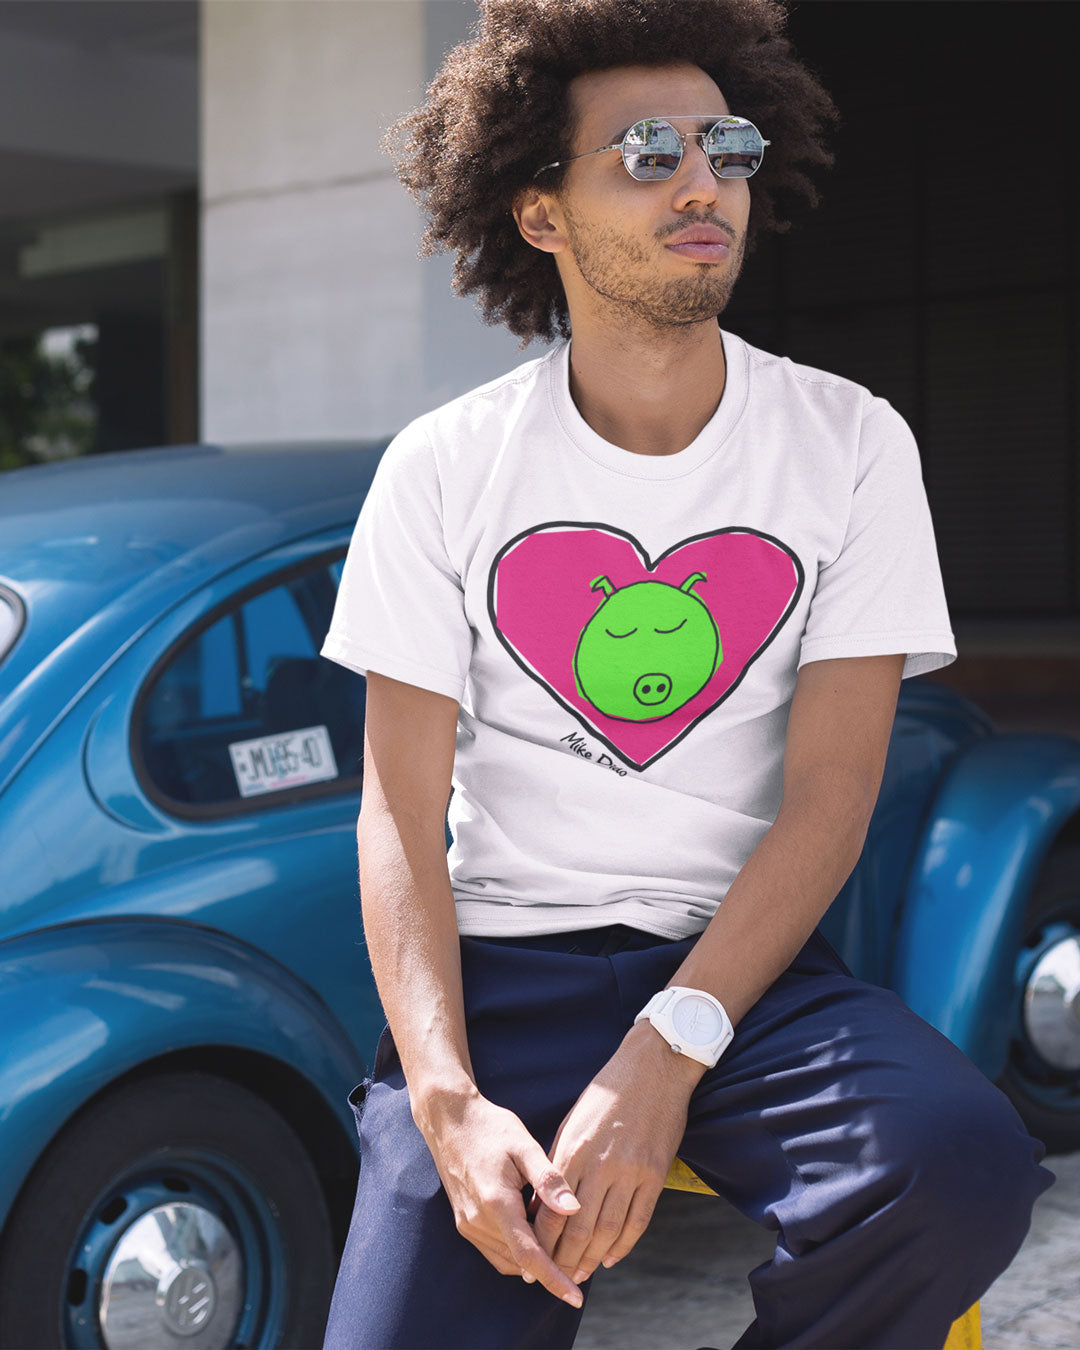 Stylish Piggy T-Shirt And Heart By Mike Dido